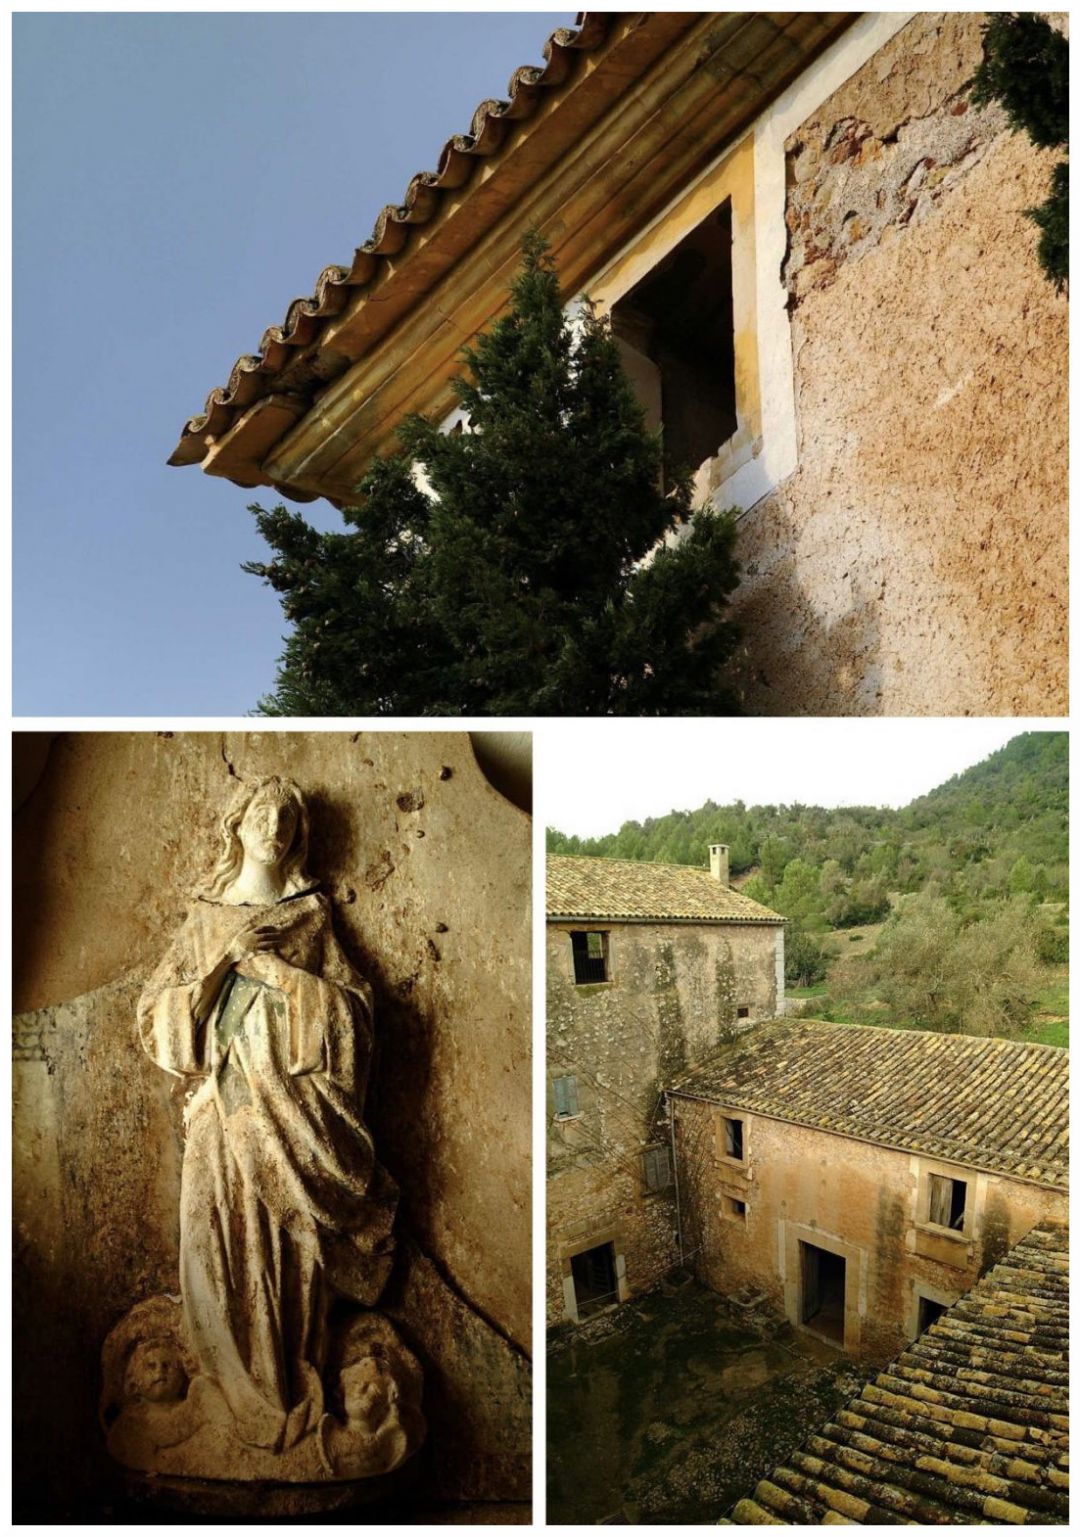 Son Brull Mallorca | Restoration Hotels - The Collection of ruins to fabulous | The Aficionados Journal 